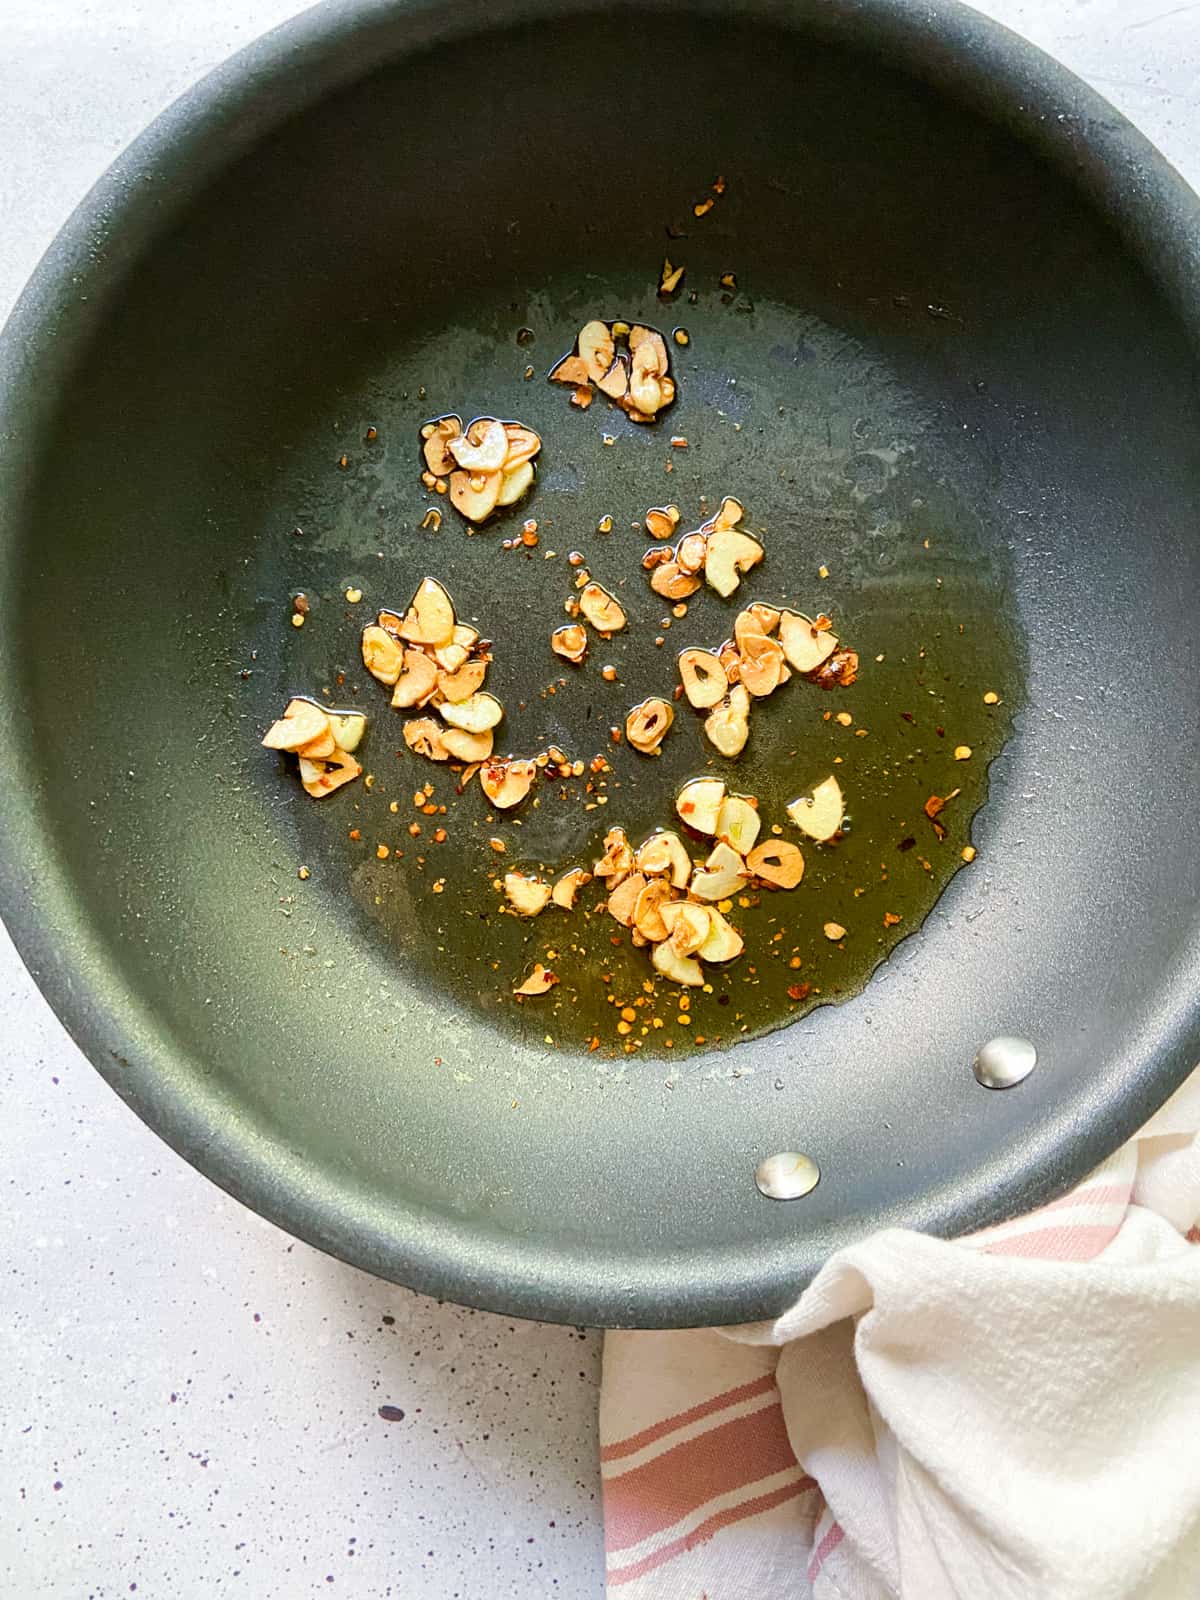 A skillet with fried garlic, crushed red pepper flakes, and olive oil.